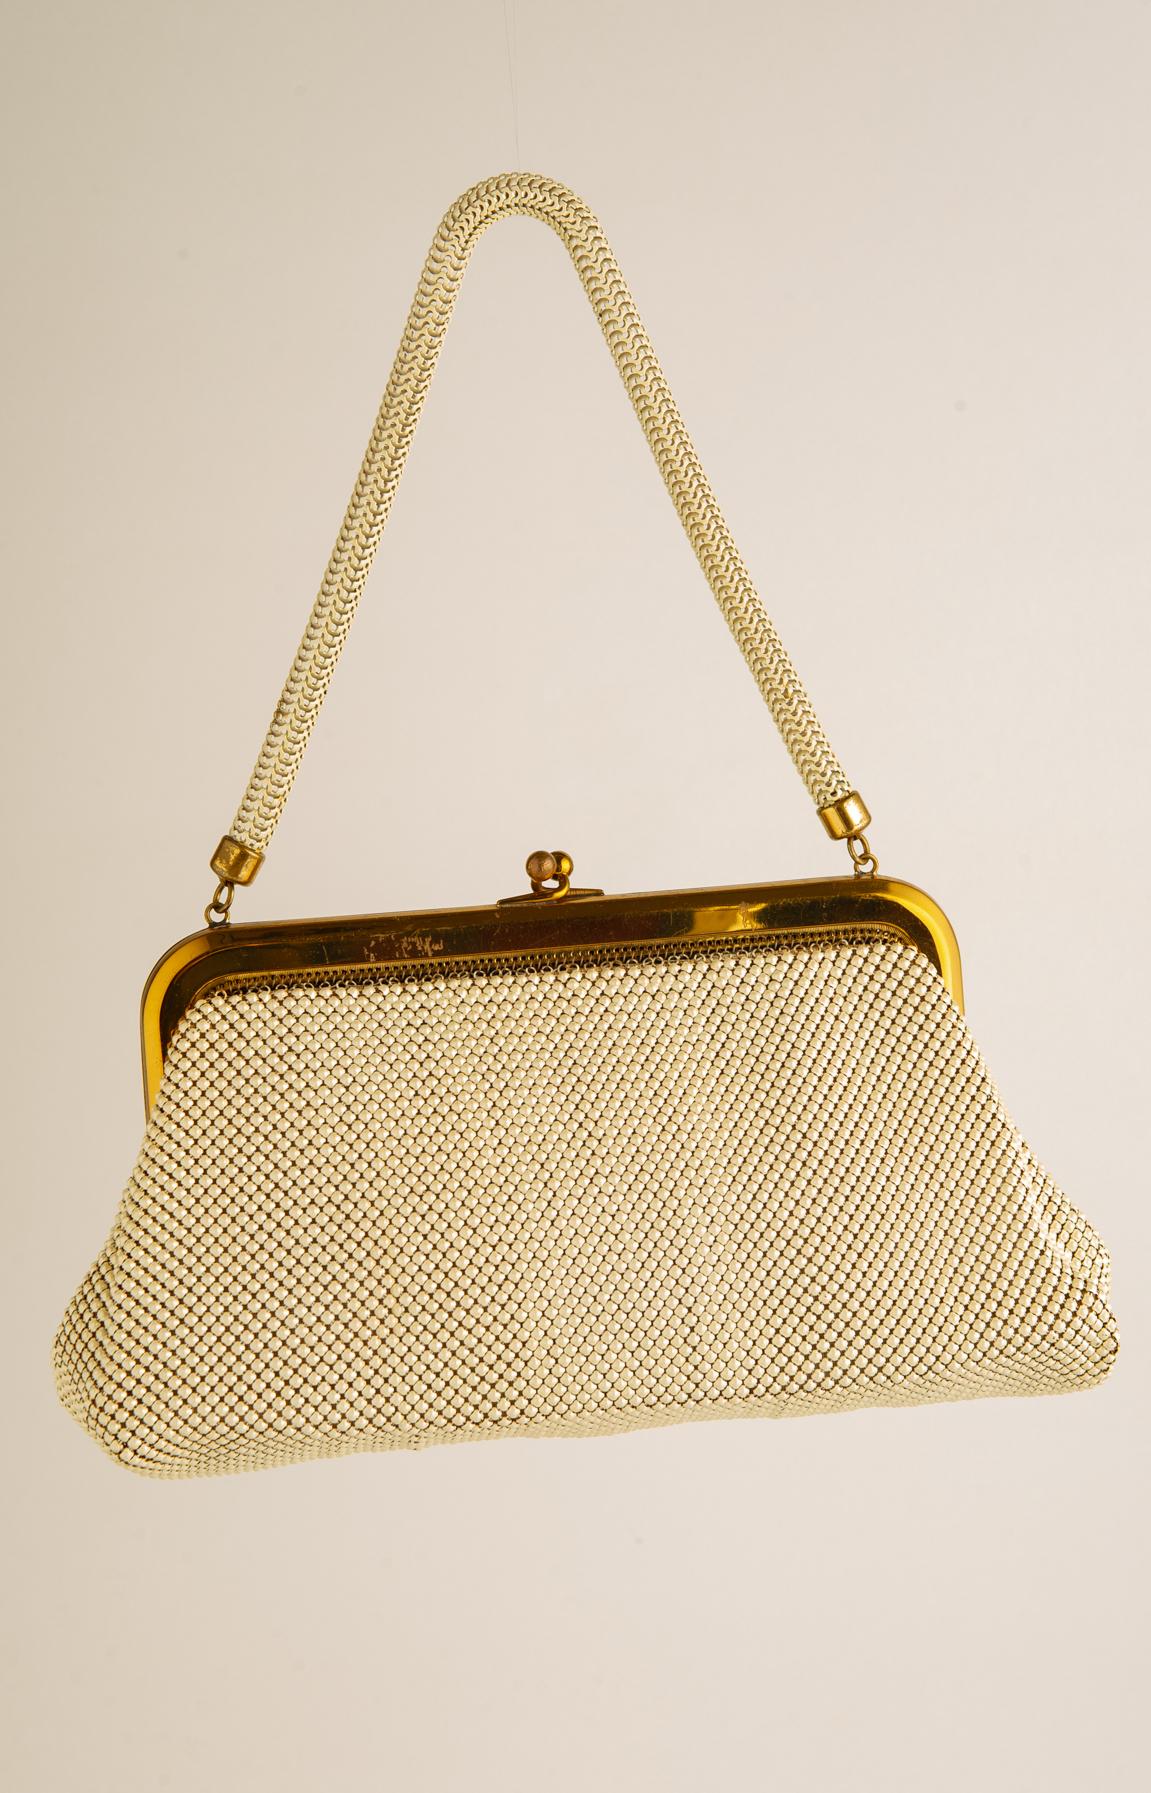 American Classical  Vintage Whiting & Davis Evening Bag For Sale